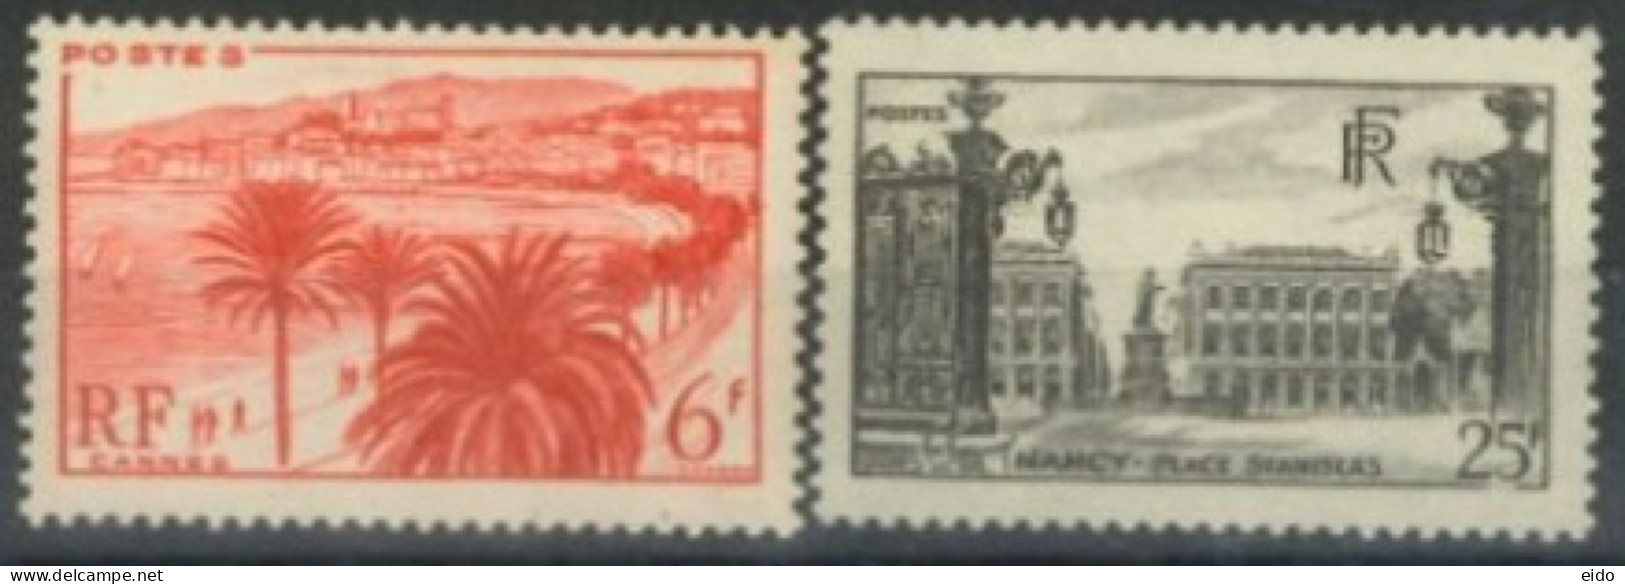 FRANCE. - 1947 - MONUMENTS AND SITES STAMPS COMPLETE SET OF 2, # 777/778, UMM (**). - Neufs